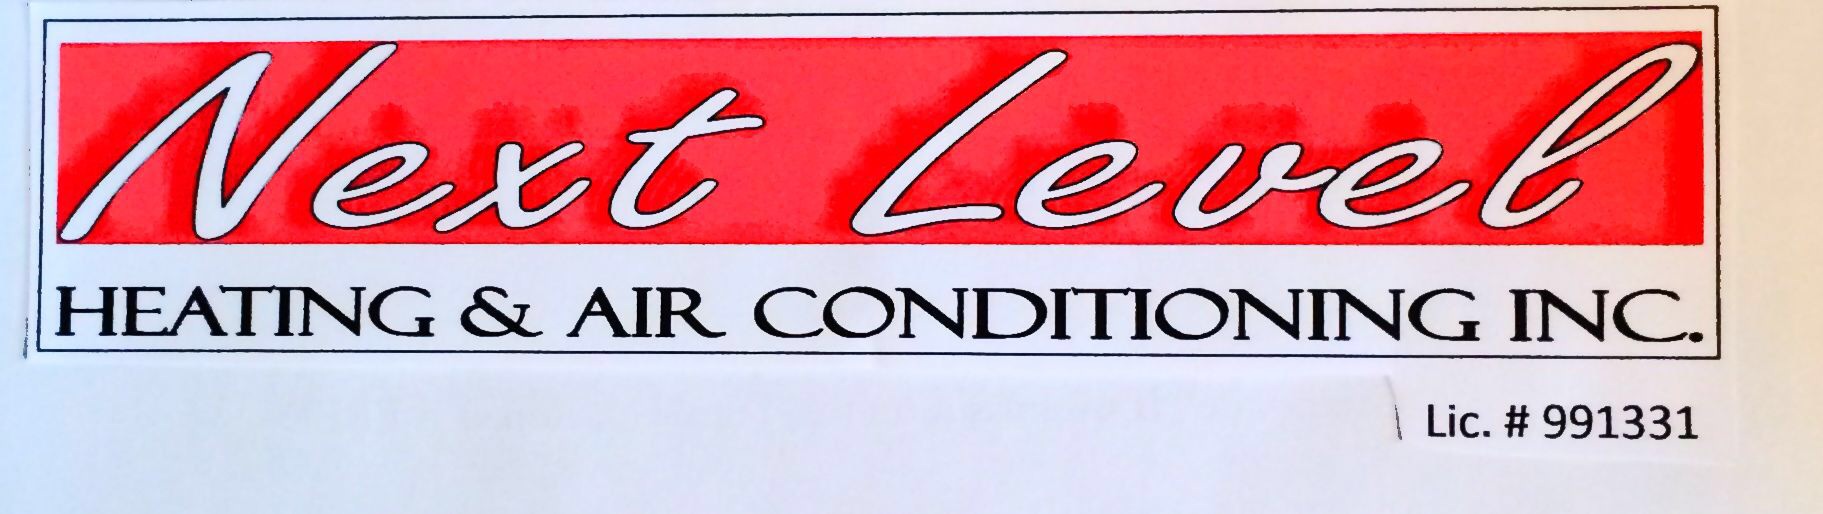 Next Level Heating & Air Conditioning, Inc. Logo